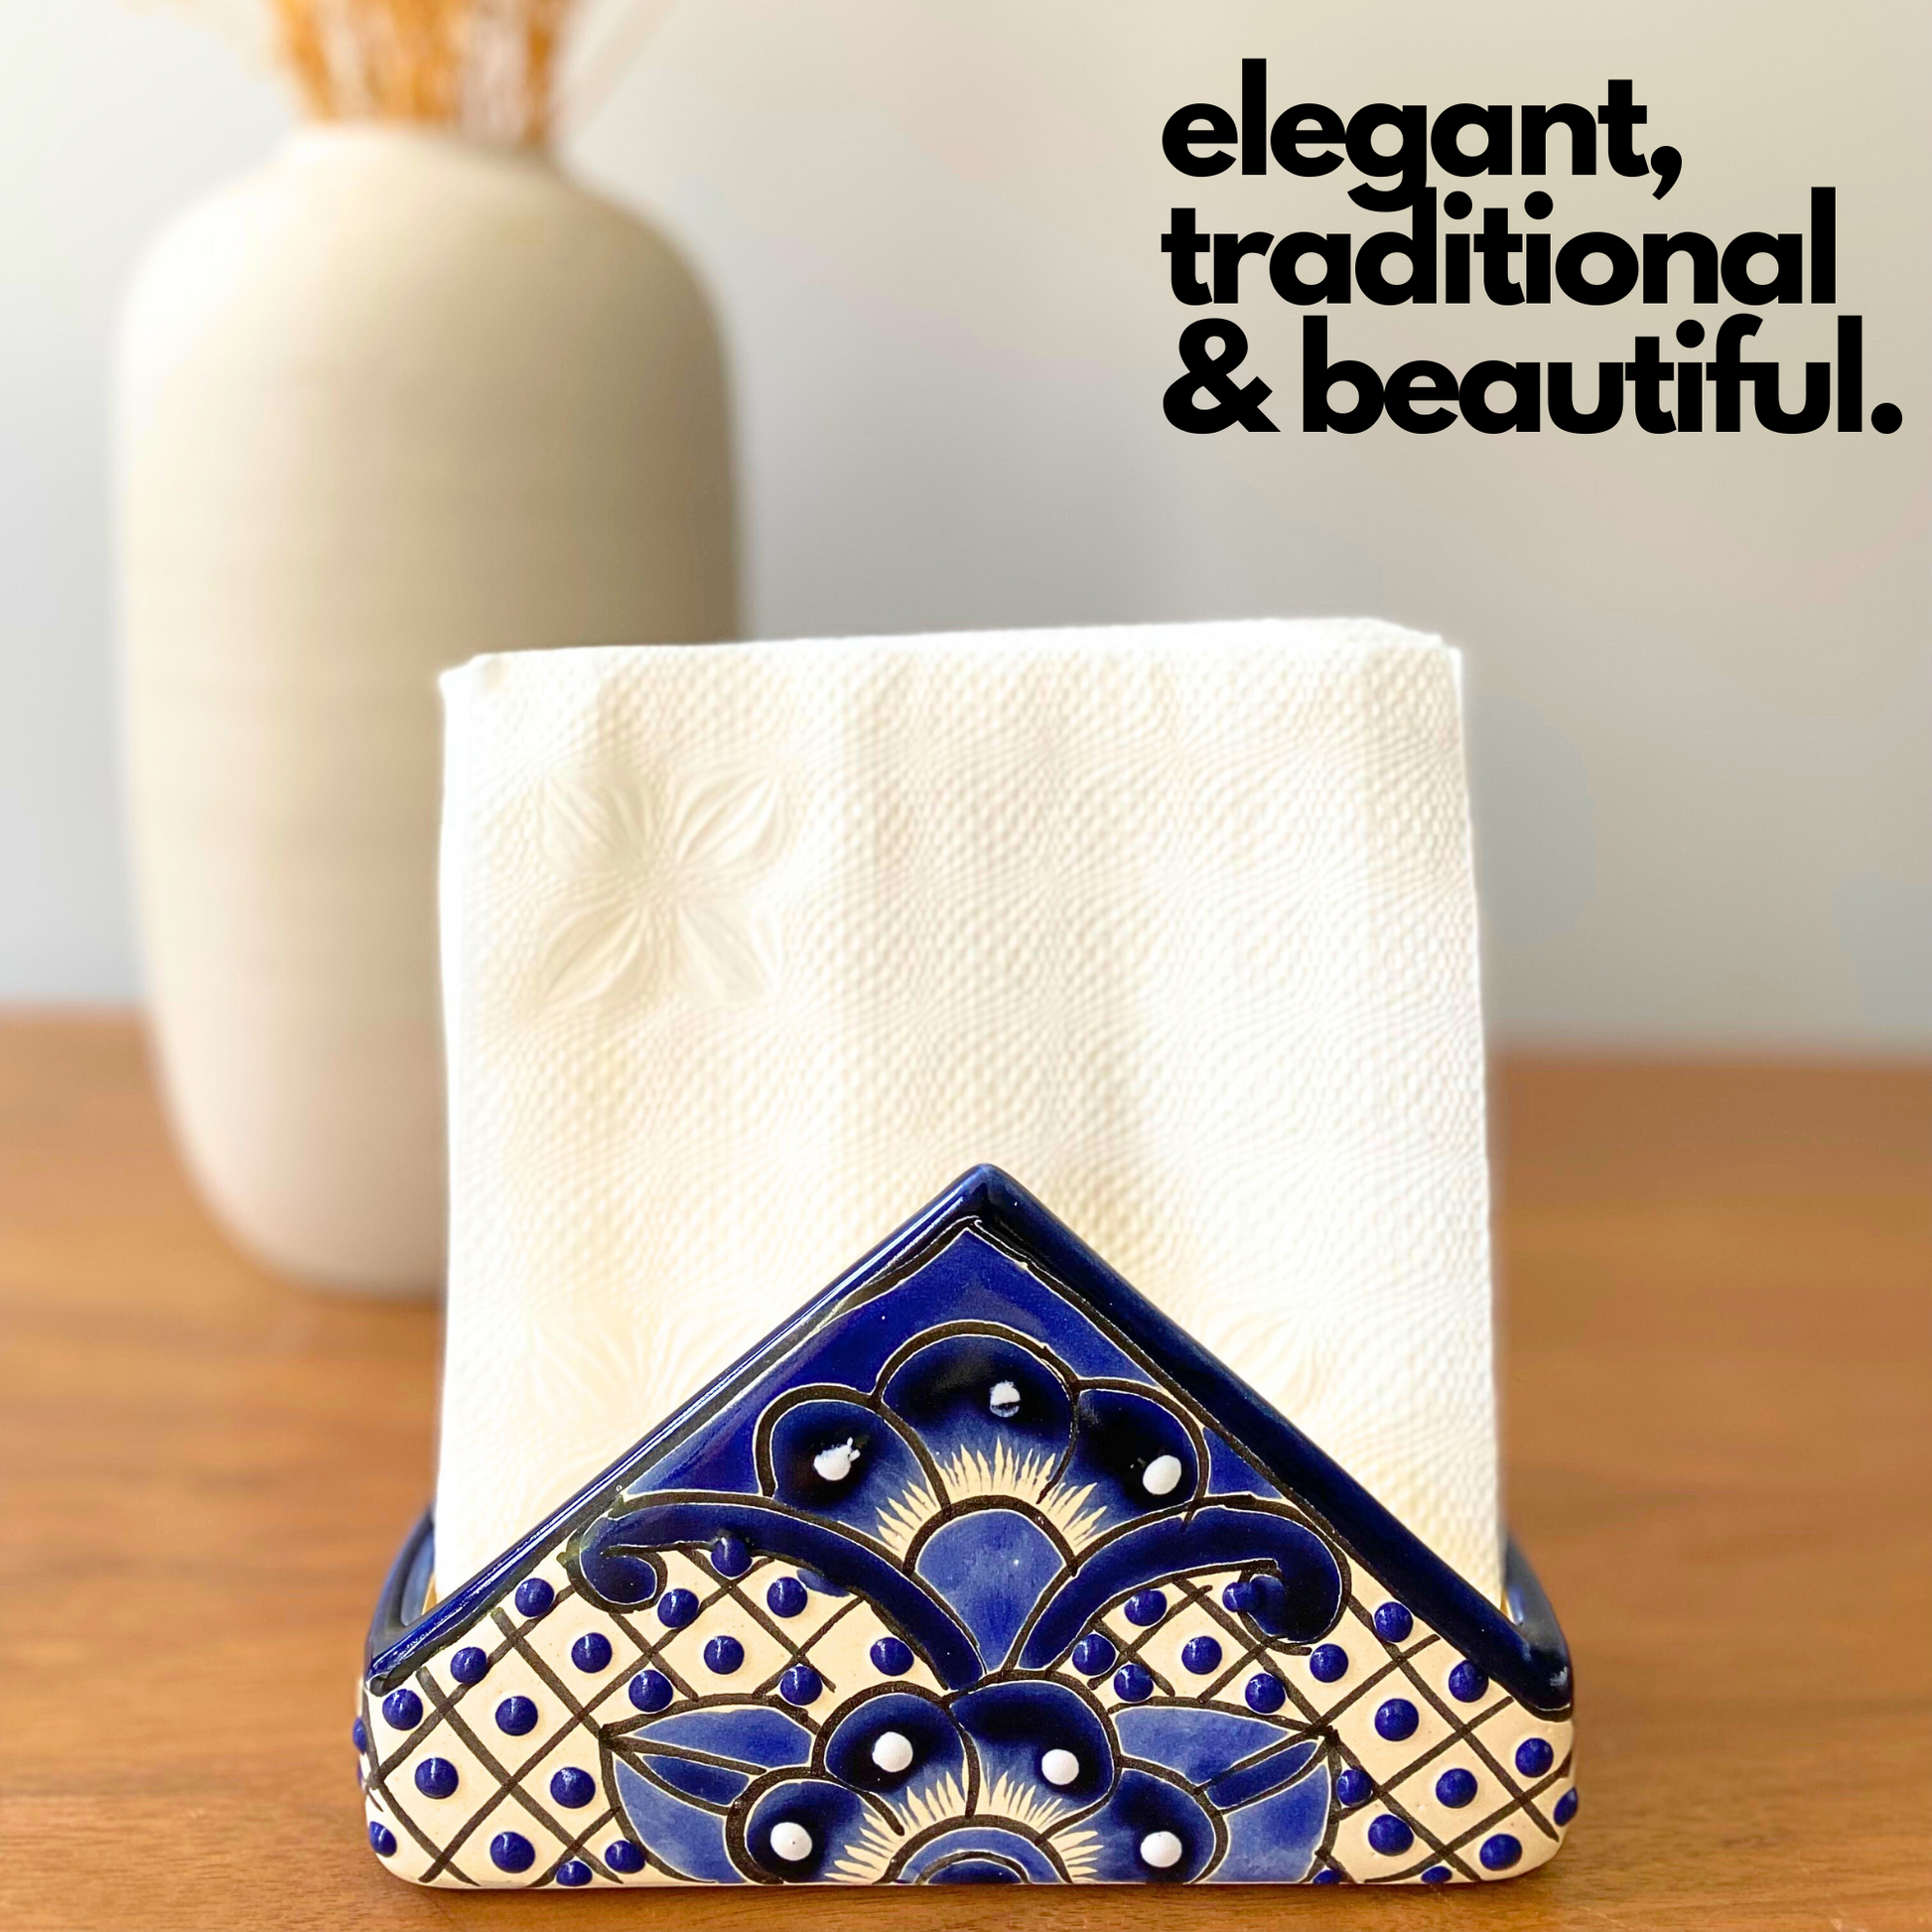 A vibrant, handmade Talavera ceramic napkin holder hand-painted by Mexico's finest artisans, perfect for any kitchen or dining table setting.